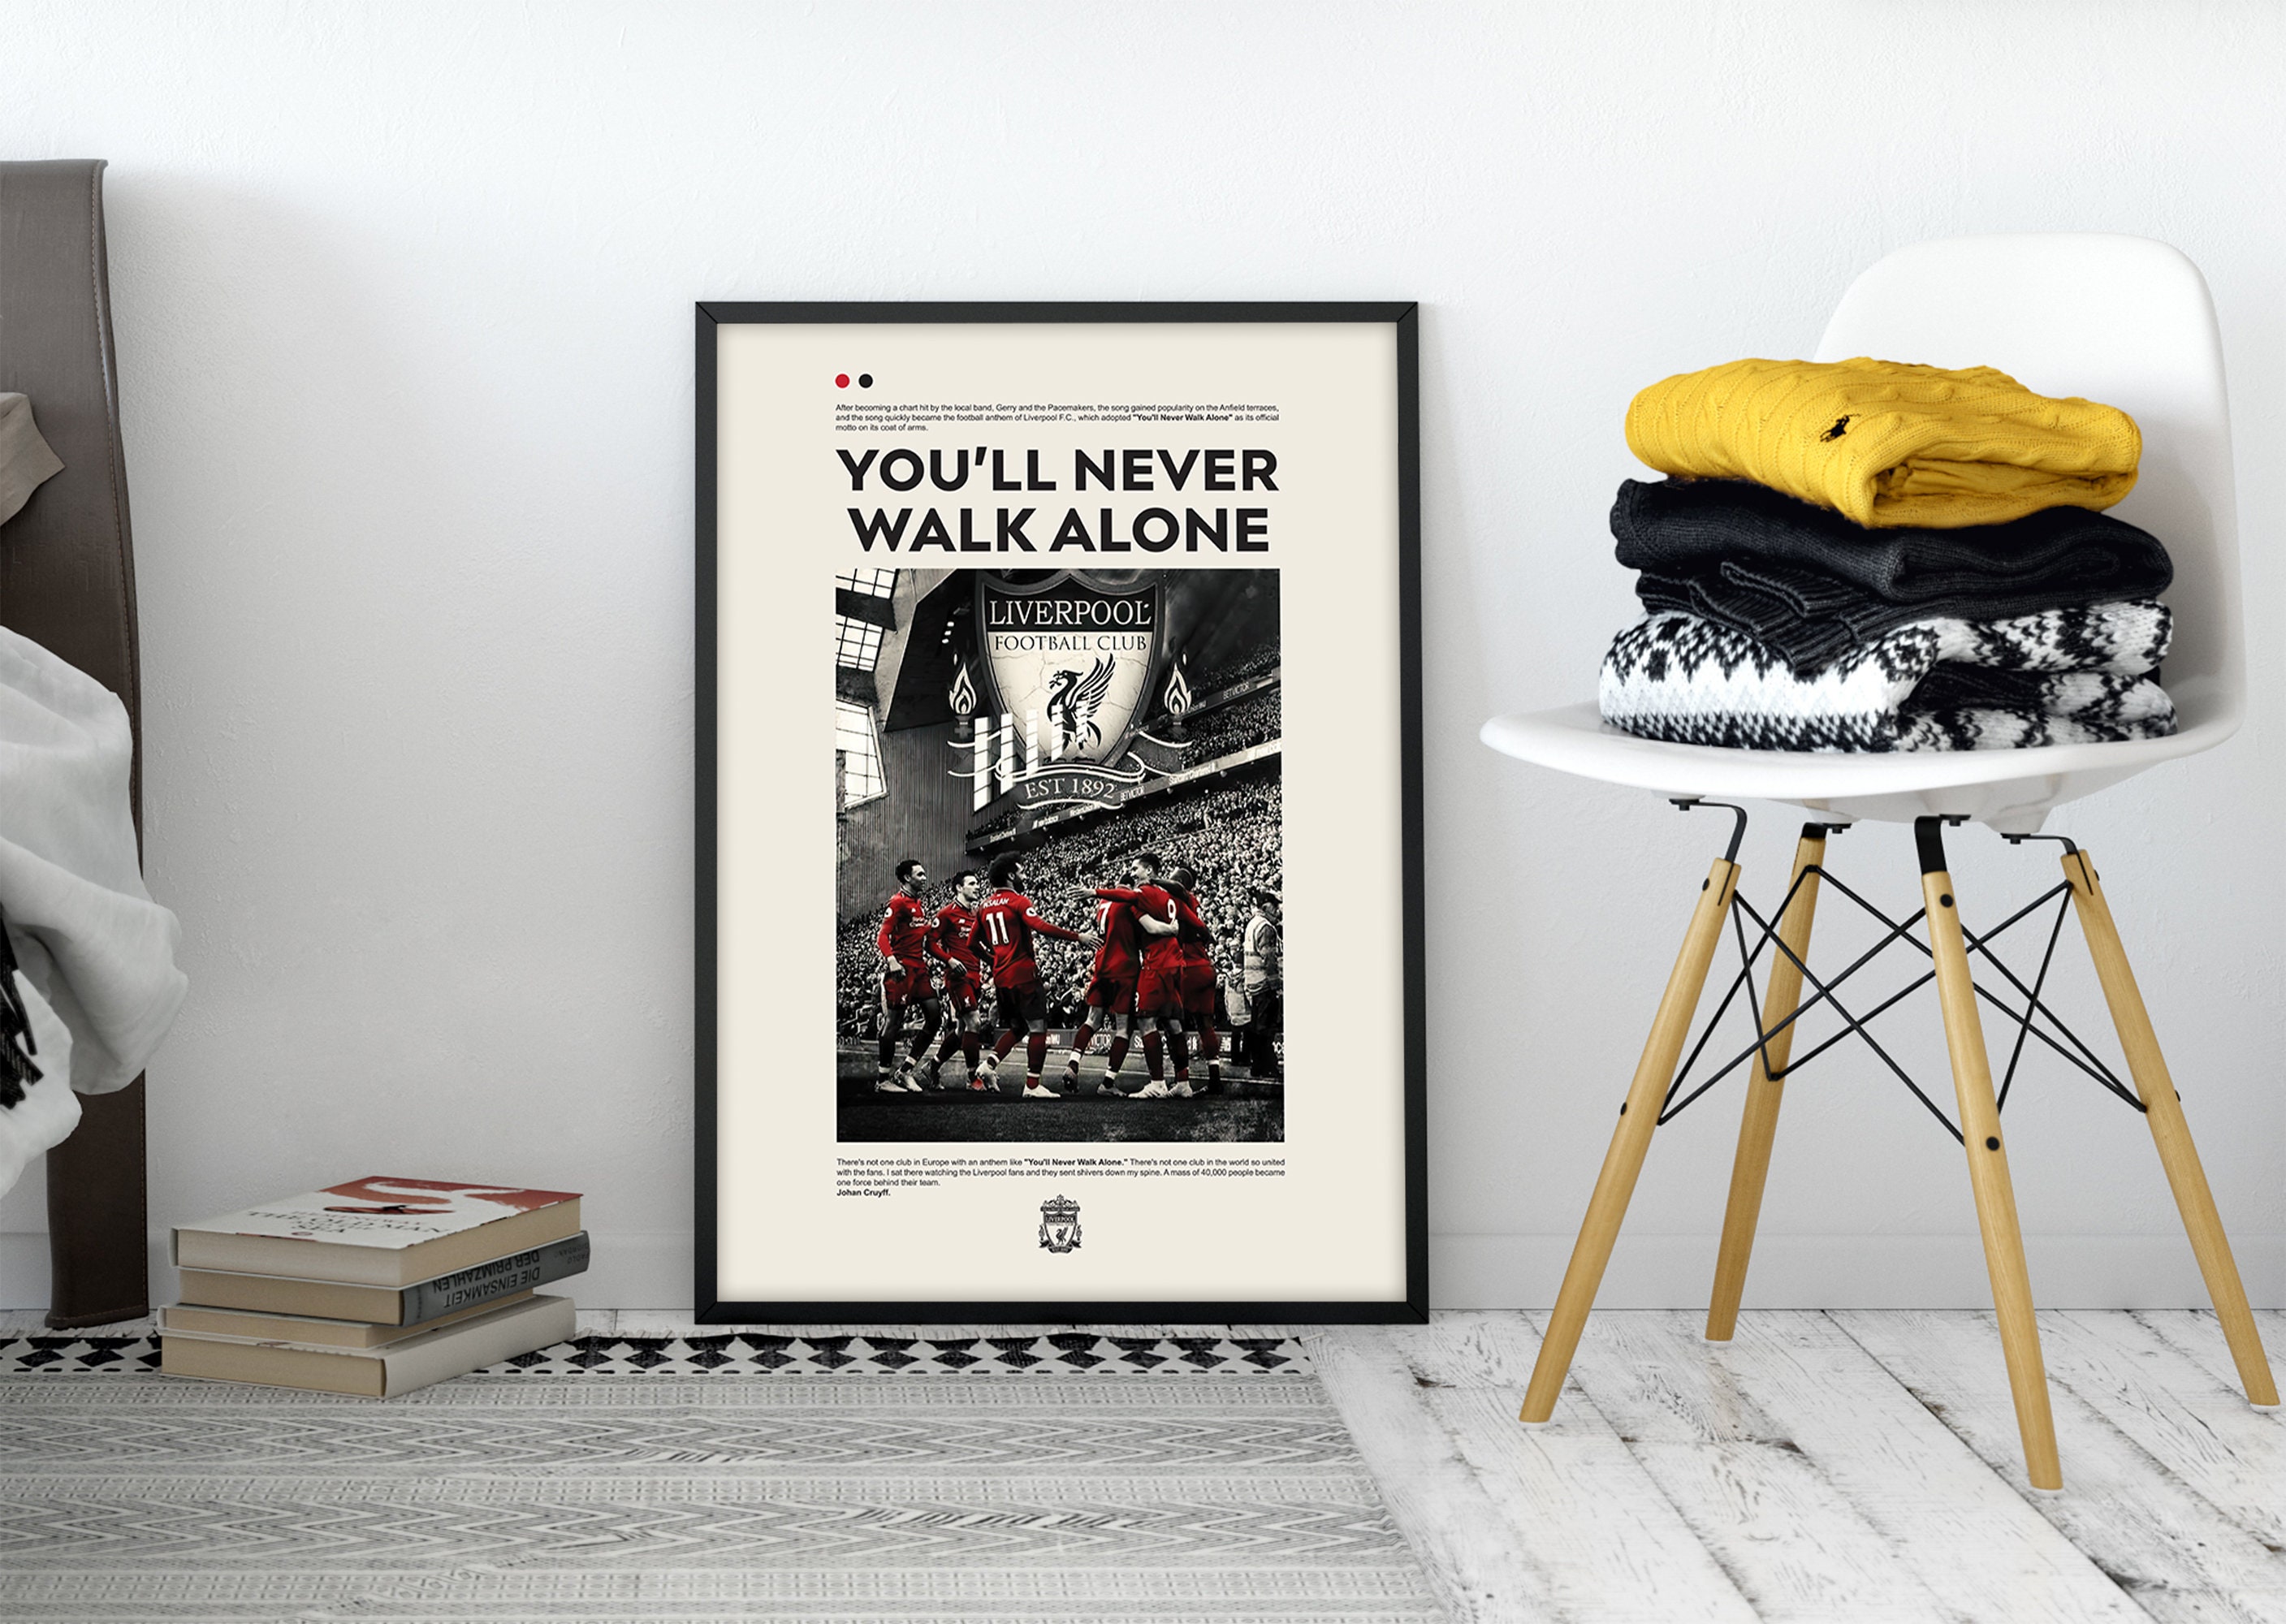 Discover Liverpool Poster, You'll Never Walk Alone Poster, Decor of Liverpool Fun, Liverpool Gift Poster, Liverpool Commemorative Poster